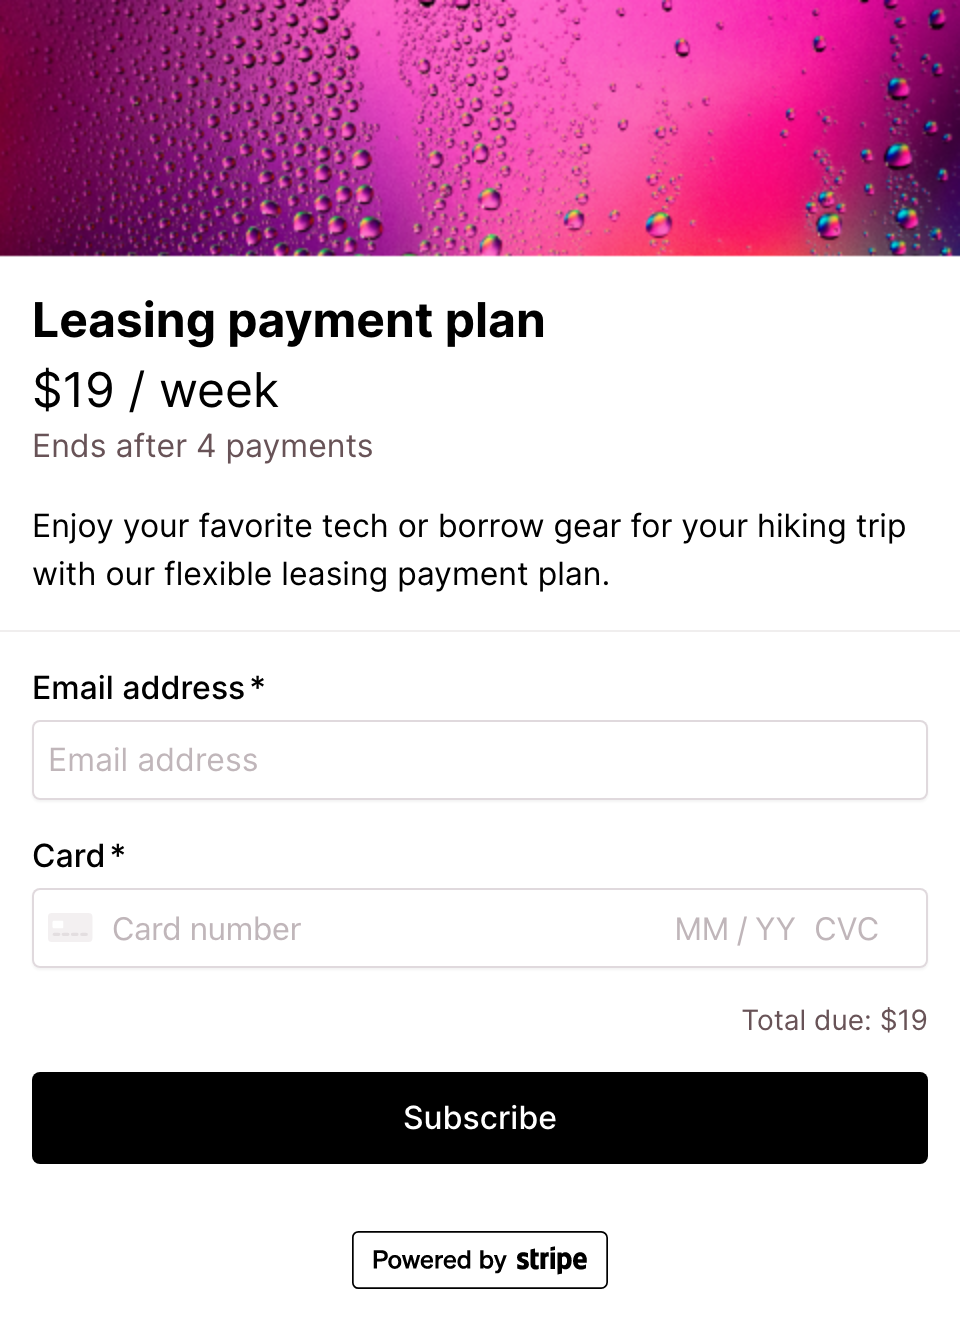 Leasing payment plan